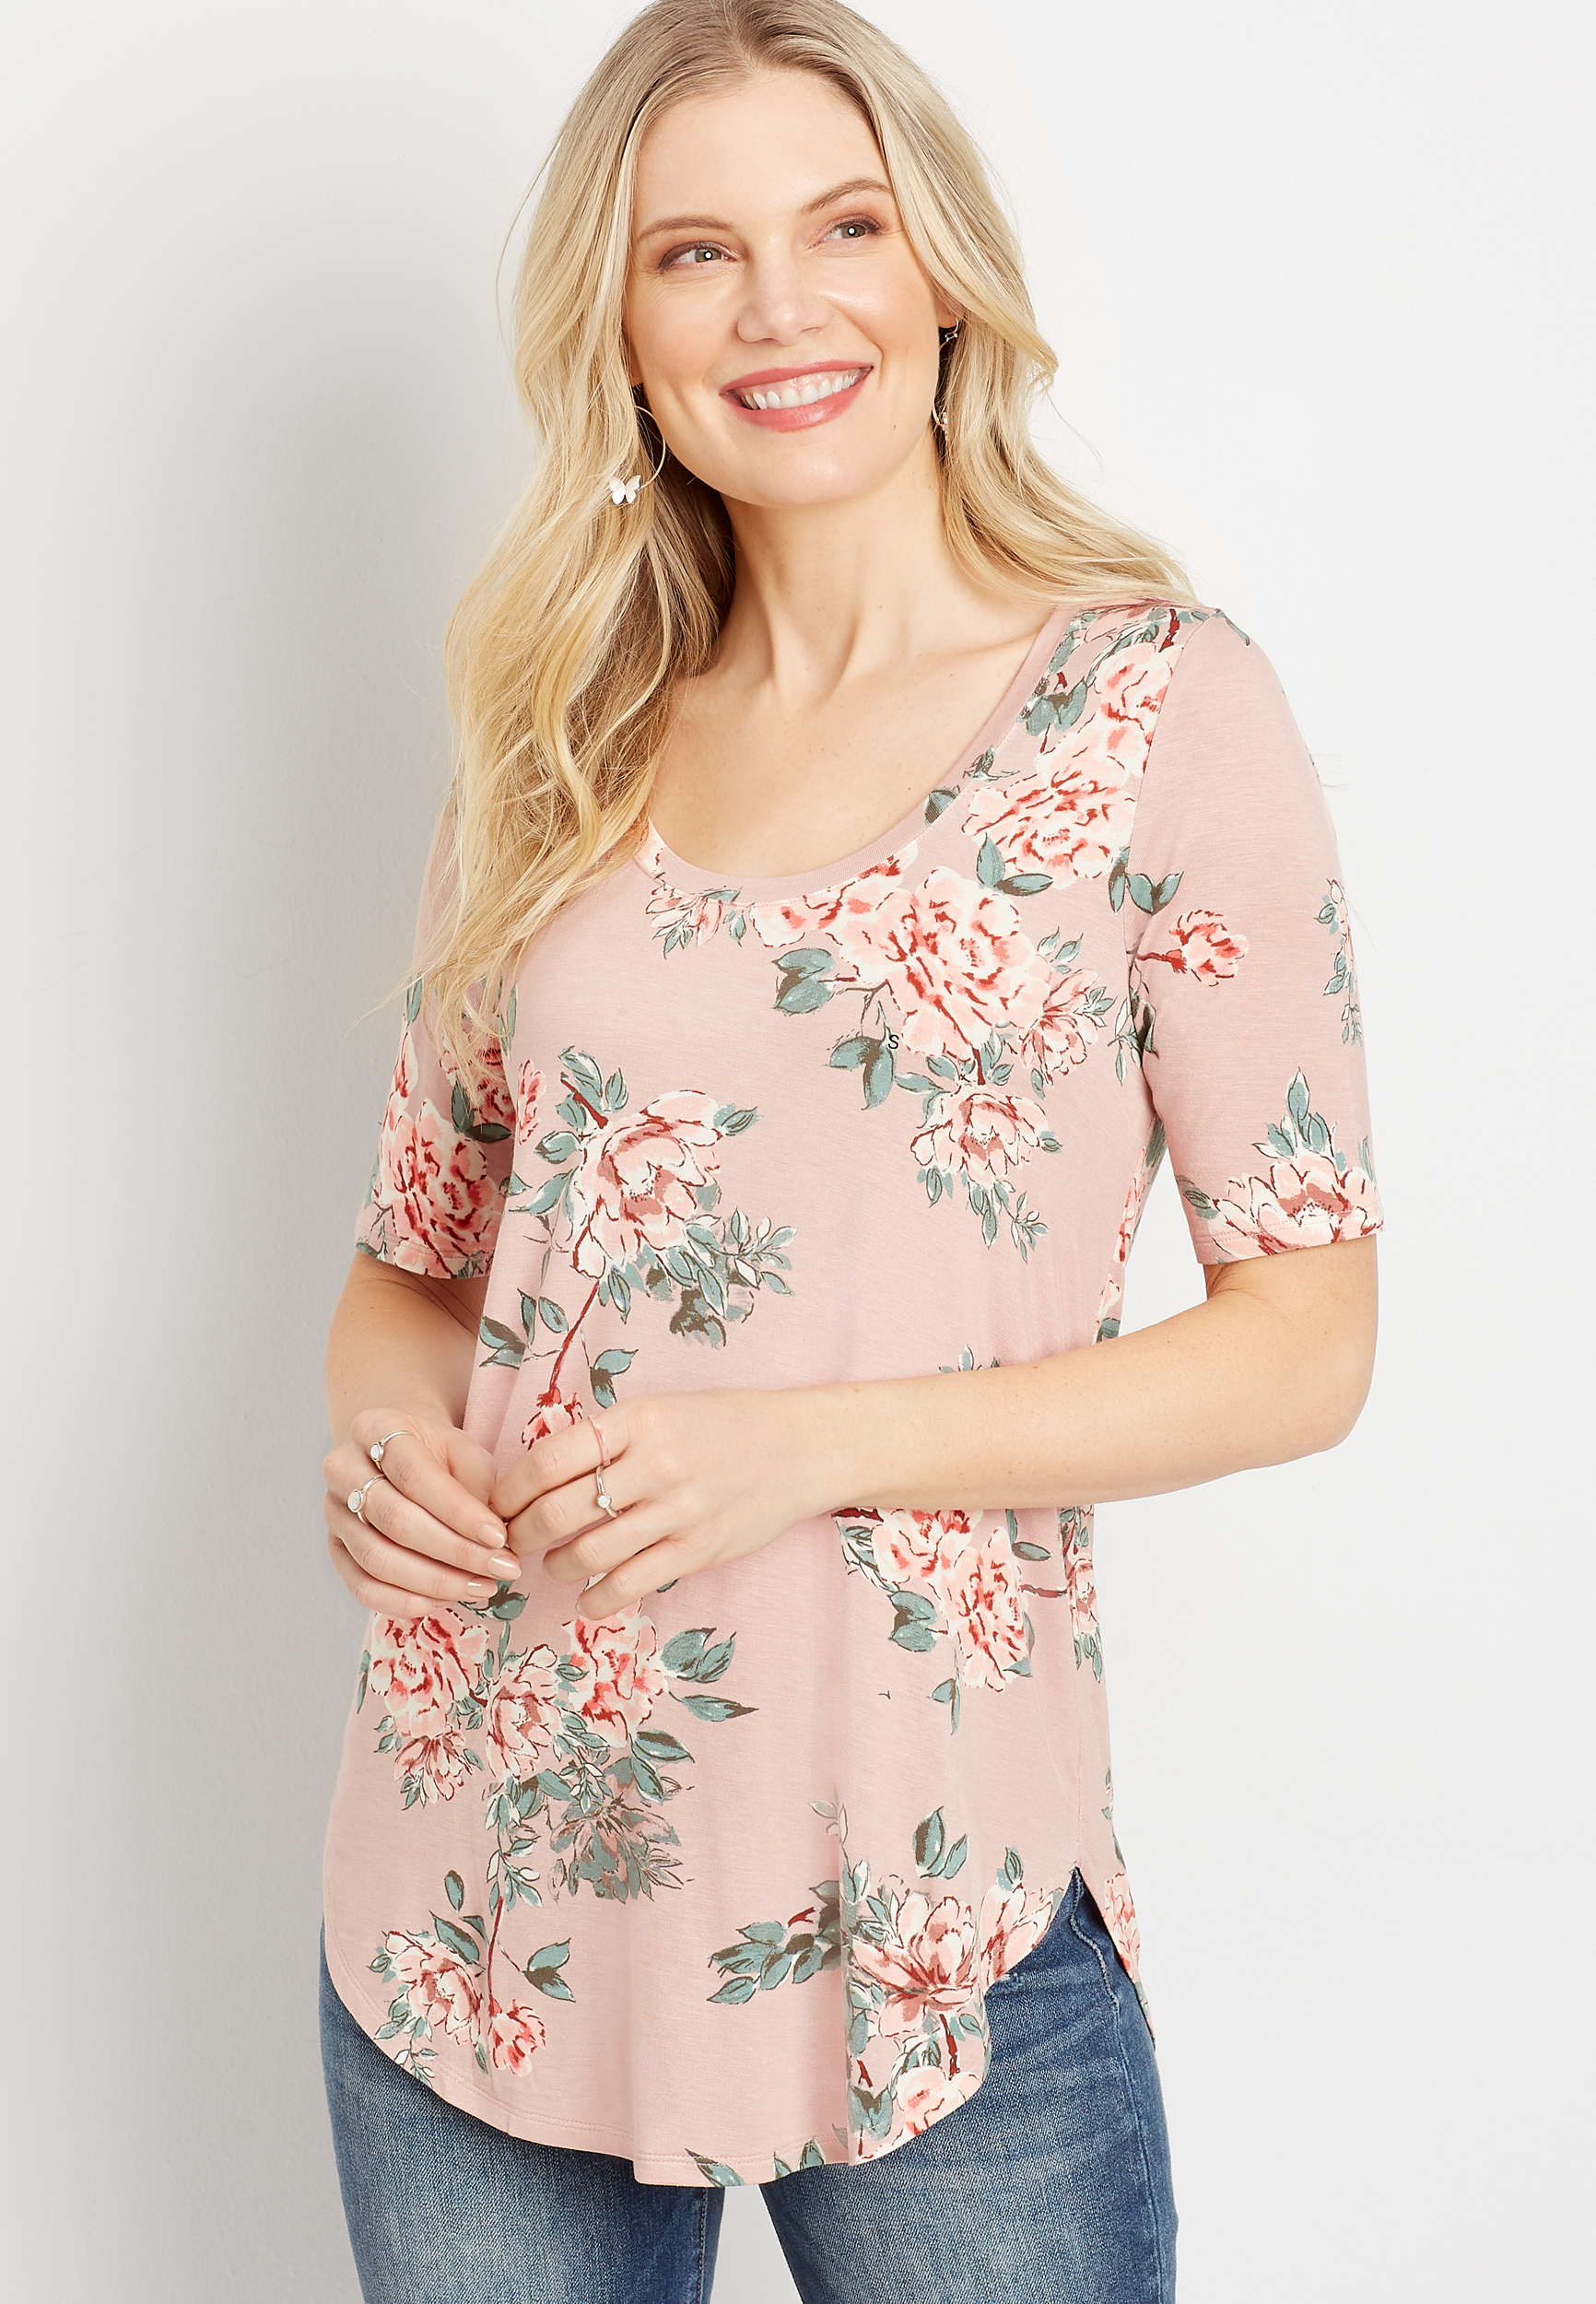 24/7 Pink Floral Flawless Tee | maurices